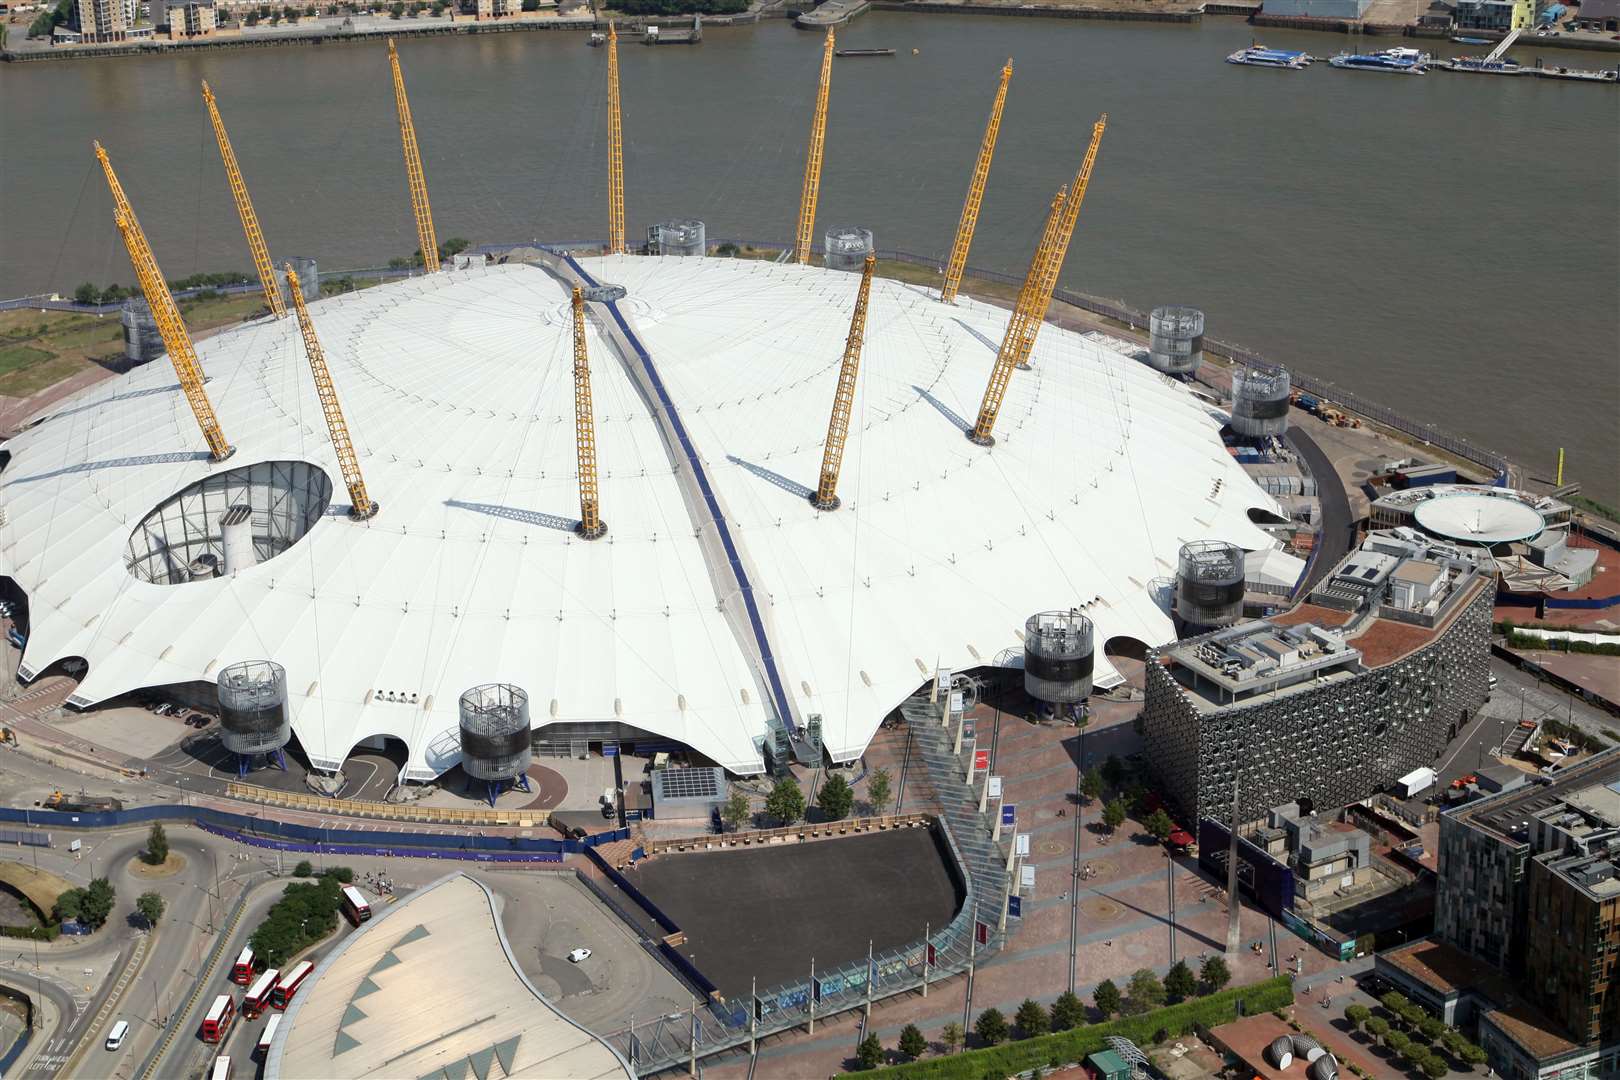 Within easy reach of North Kent, Ravensbourne University London is right alongside the world-famous O2